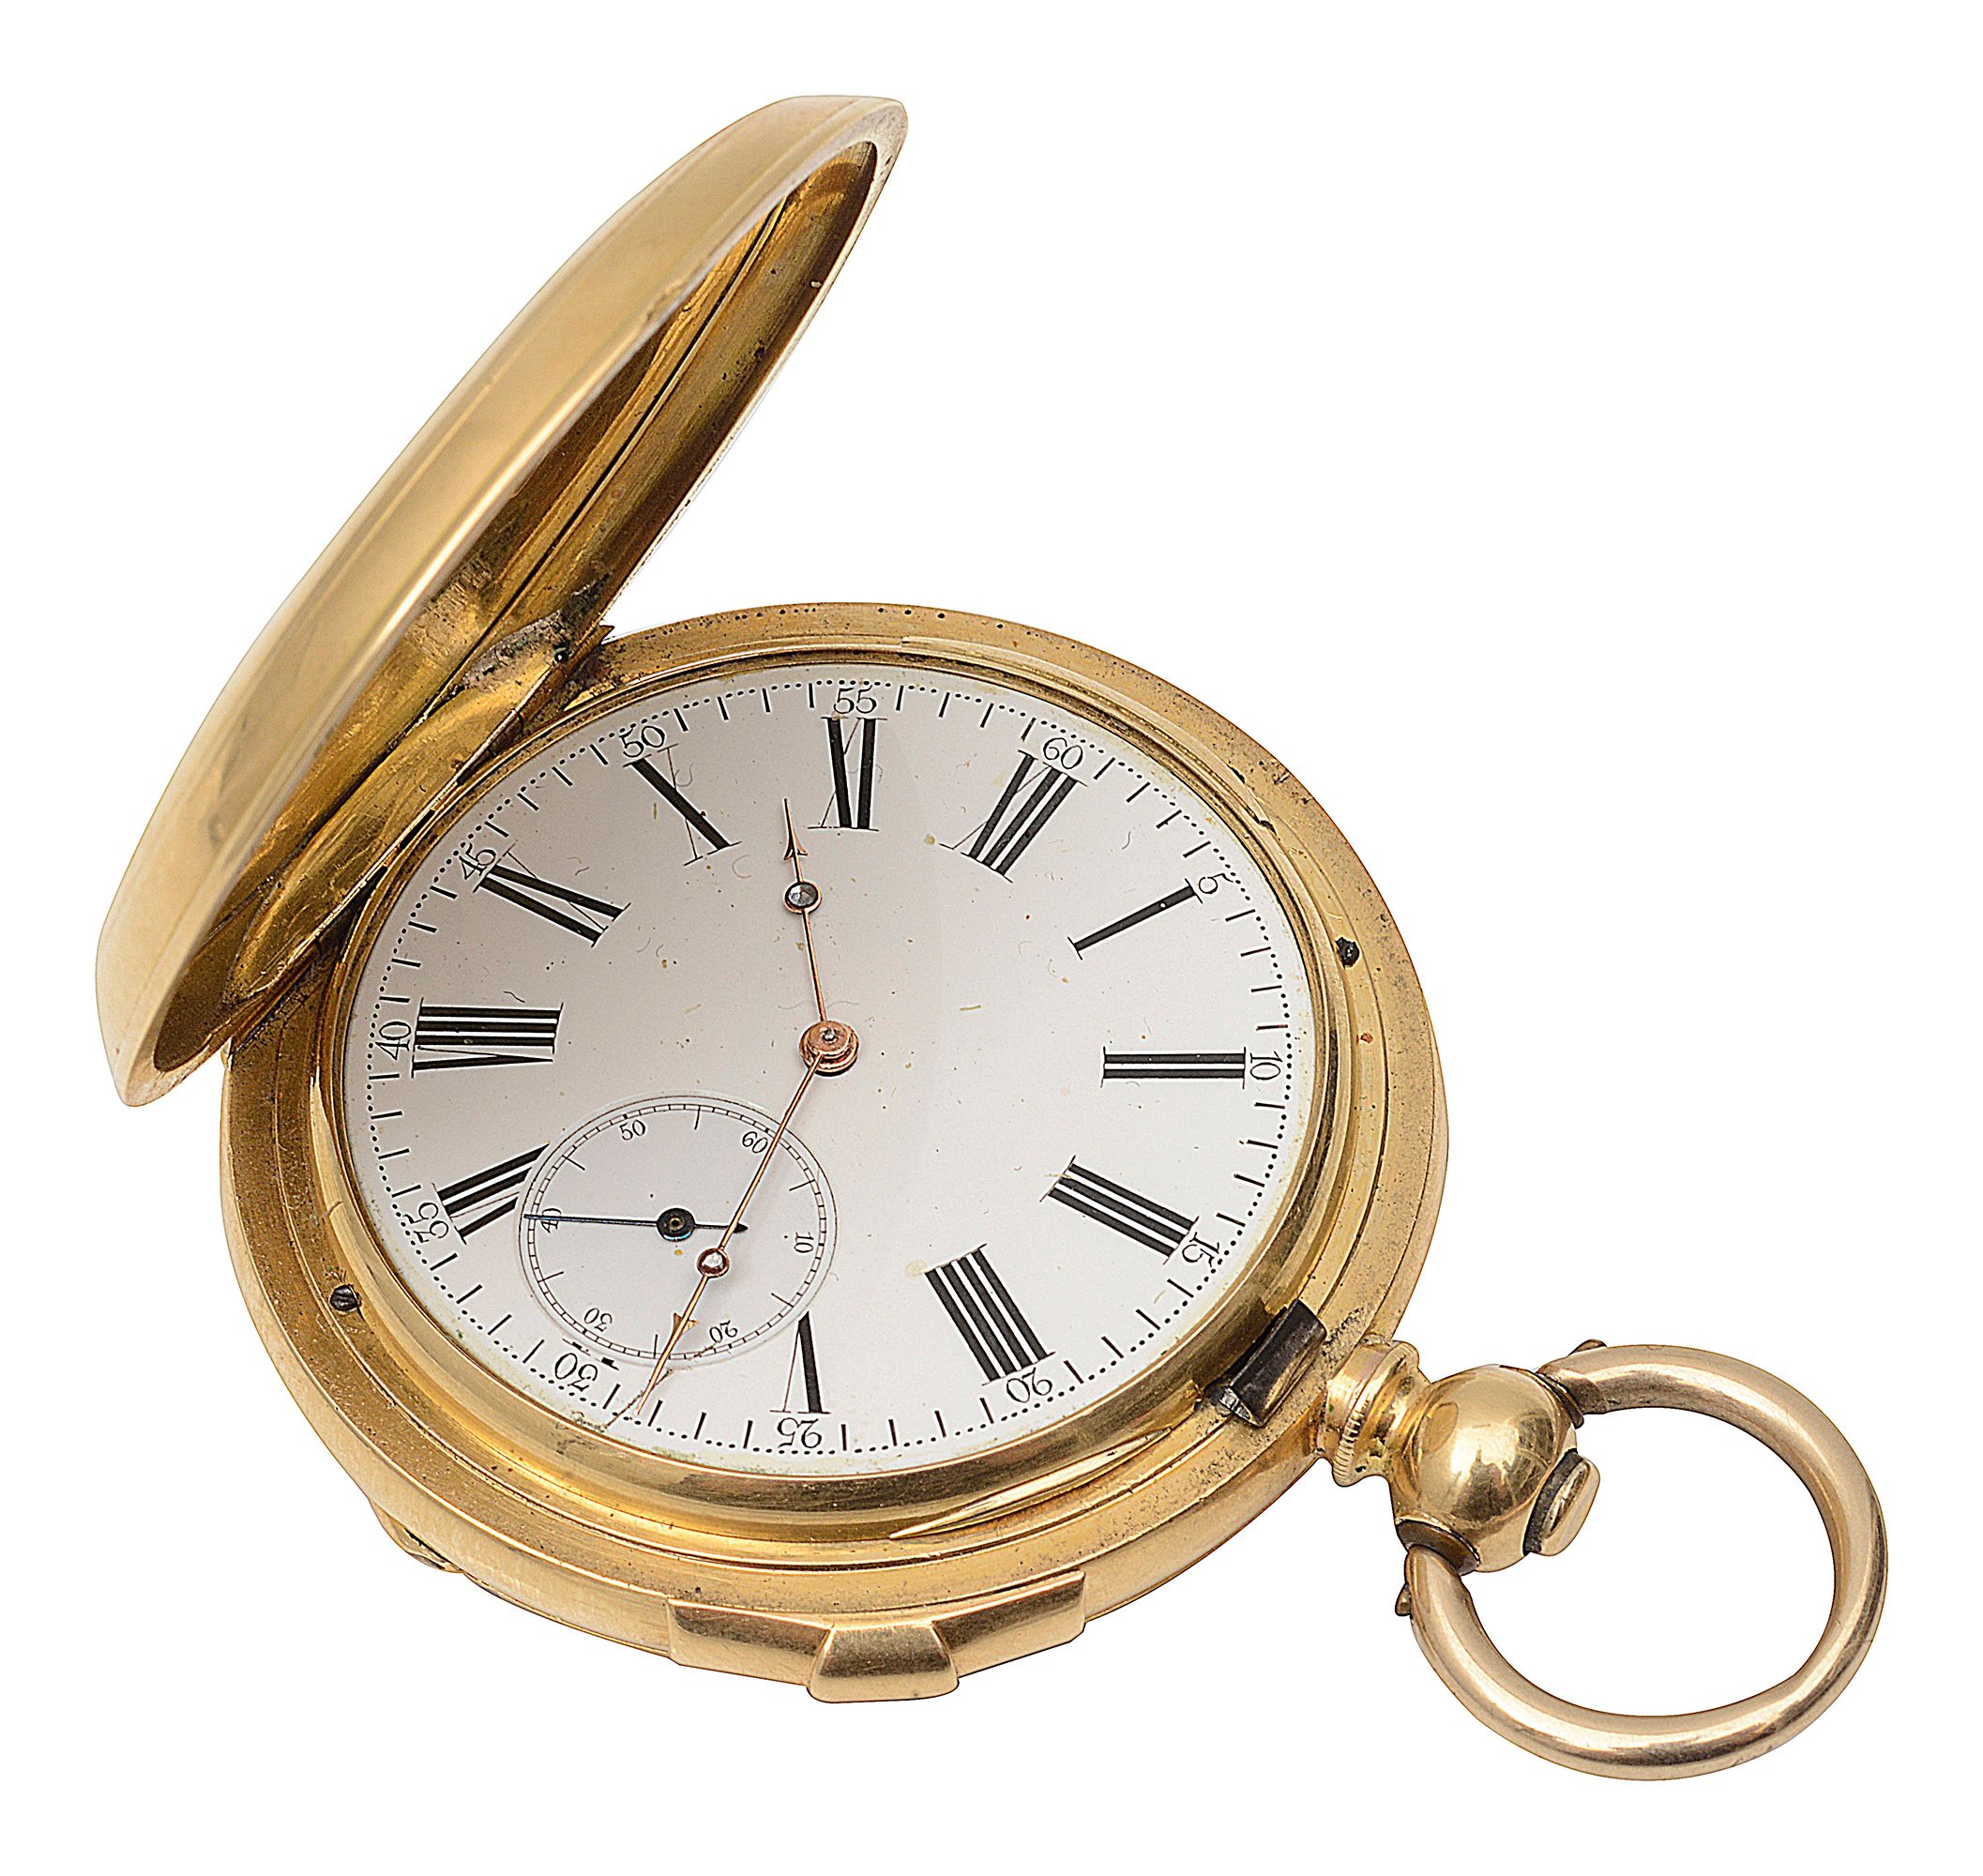 An unusual Victorian 18ct gold ''By Royal Letters Patent" hinge winding pocket watch c.1880